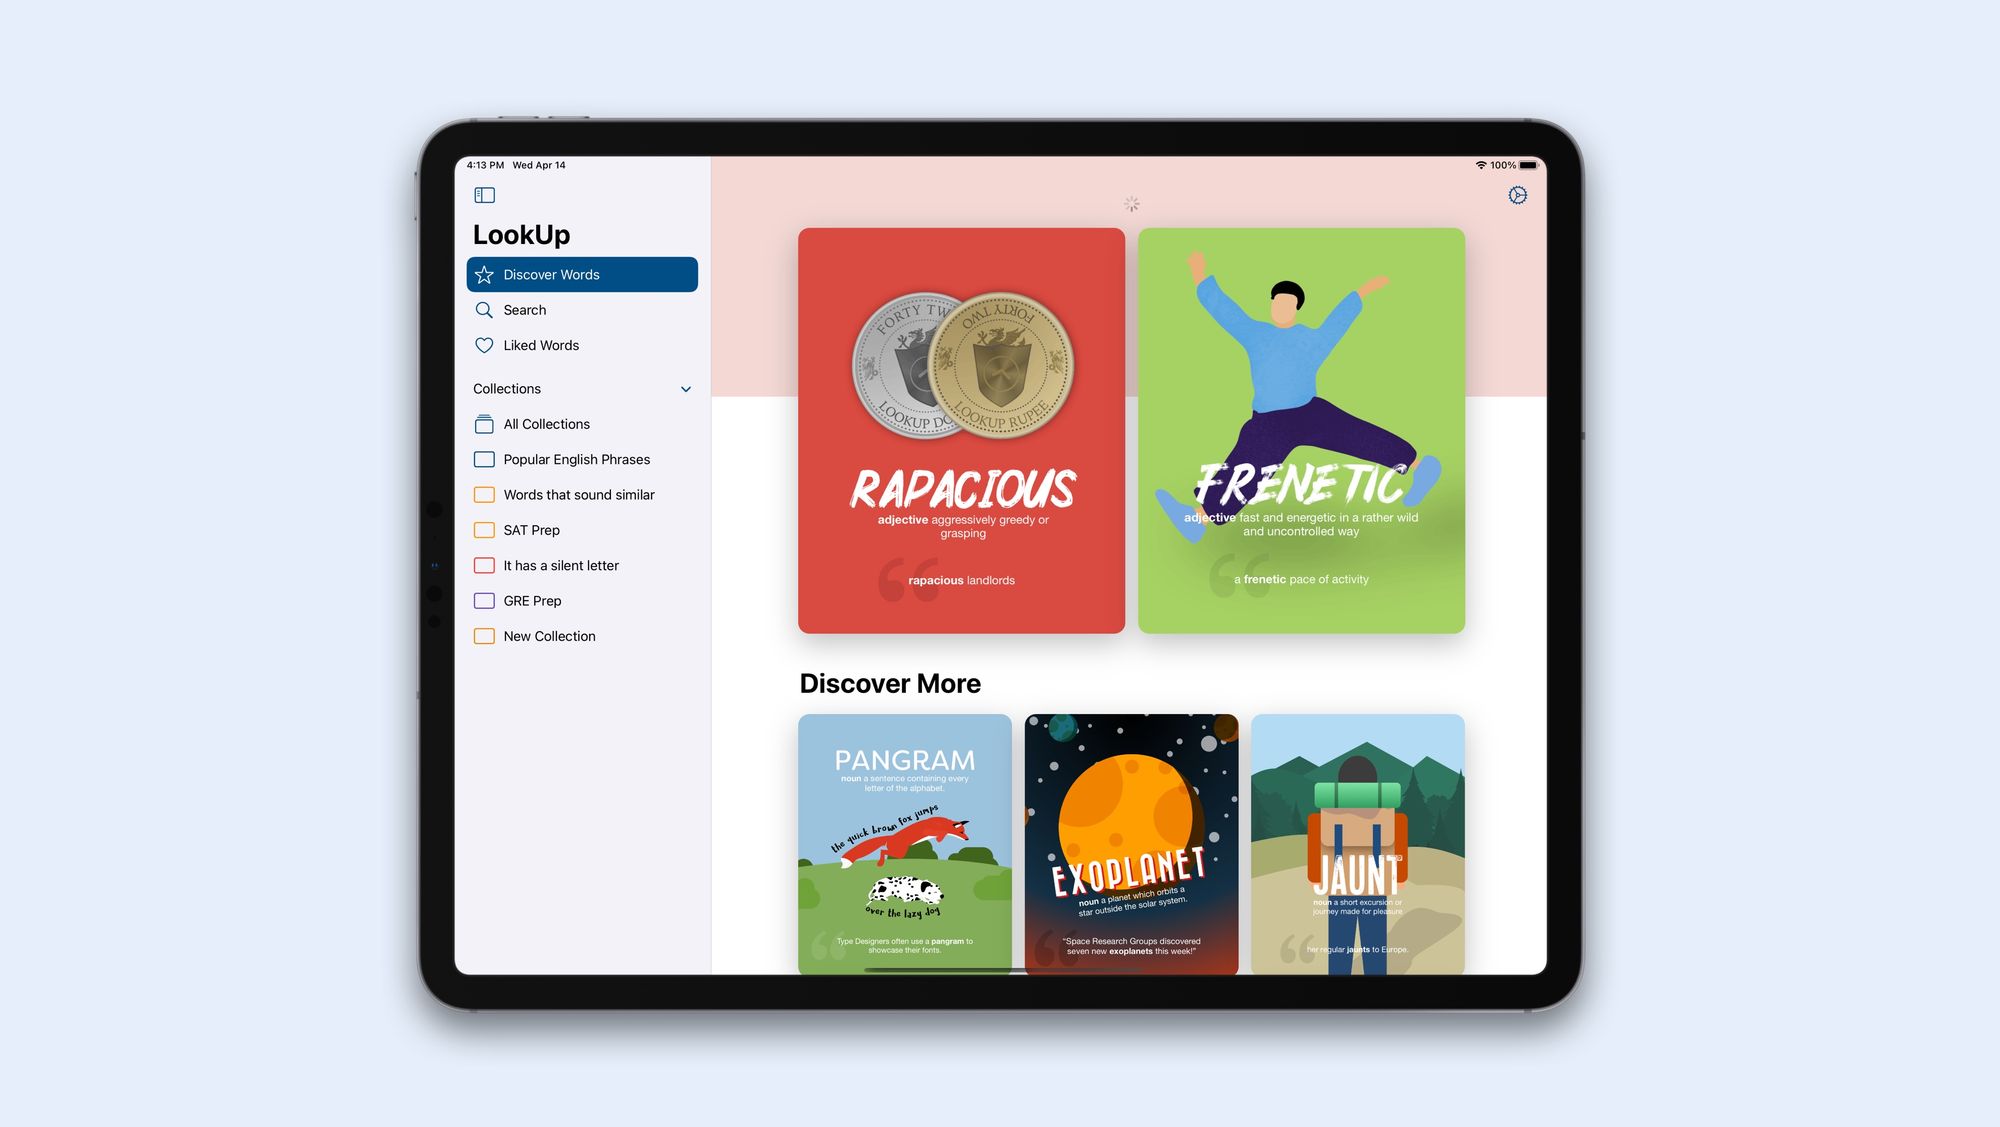 A new interface for LookUp on iPadOS